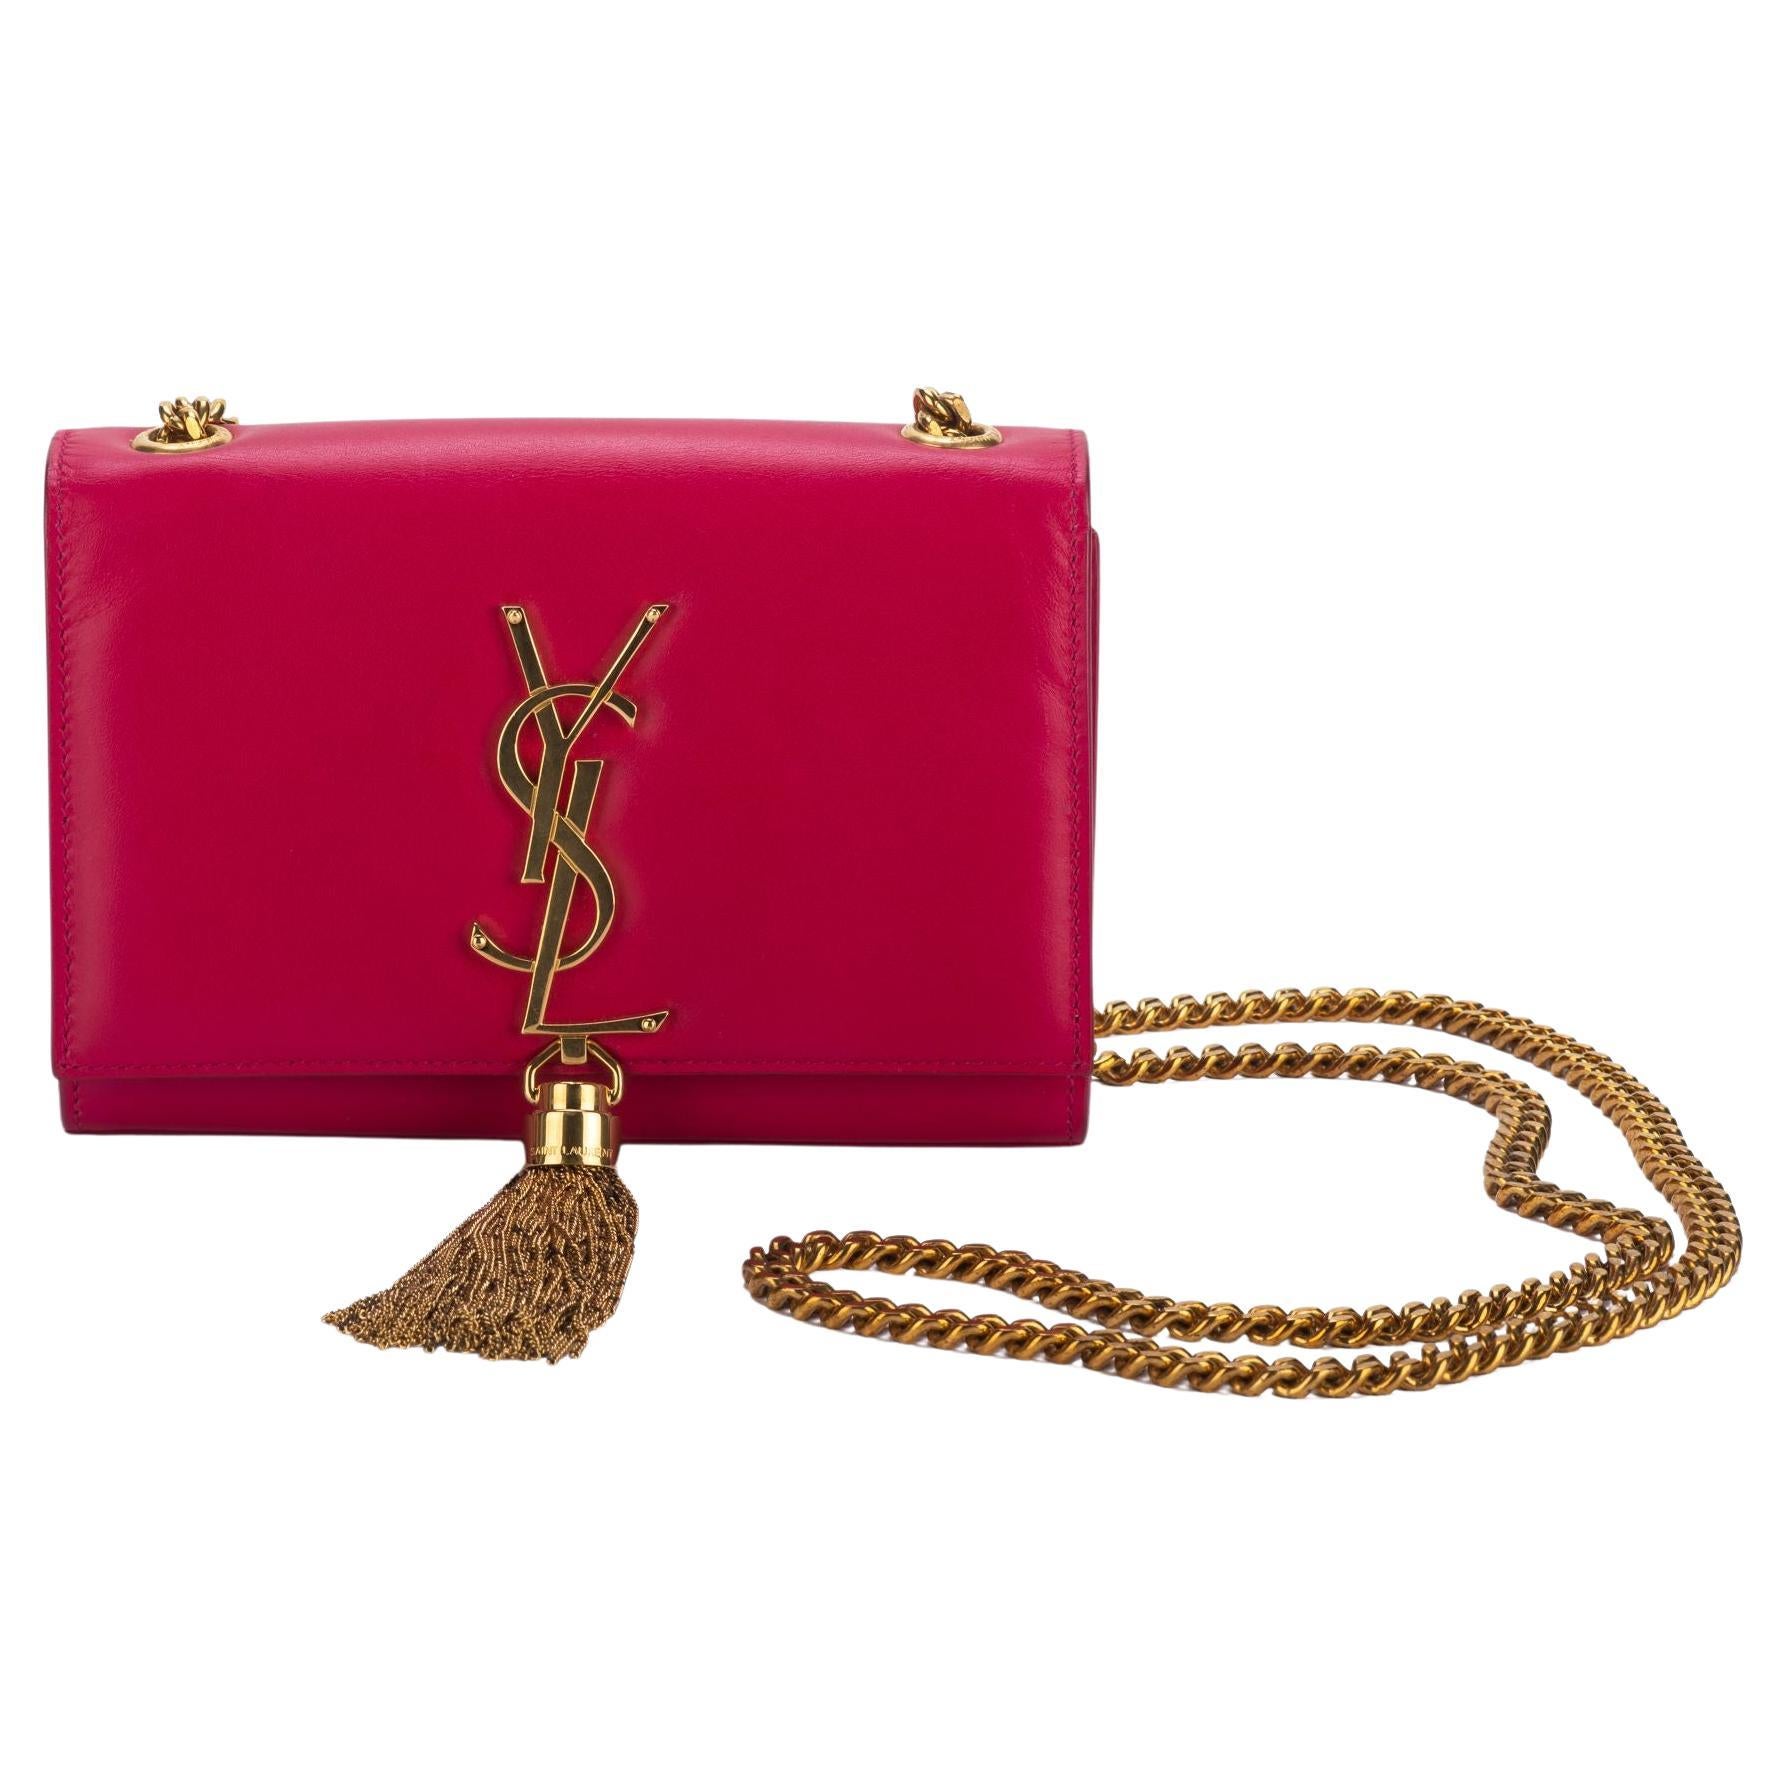 Yves Saint Laurent | Bags | Ysl Xl Red Leather Clutch Wallet Purse Magnetic  Closure Chain Flap Bag | Poshmark